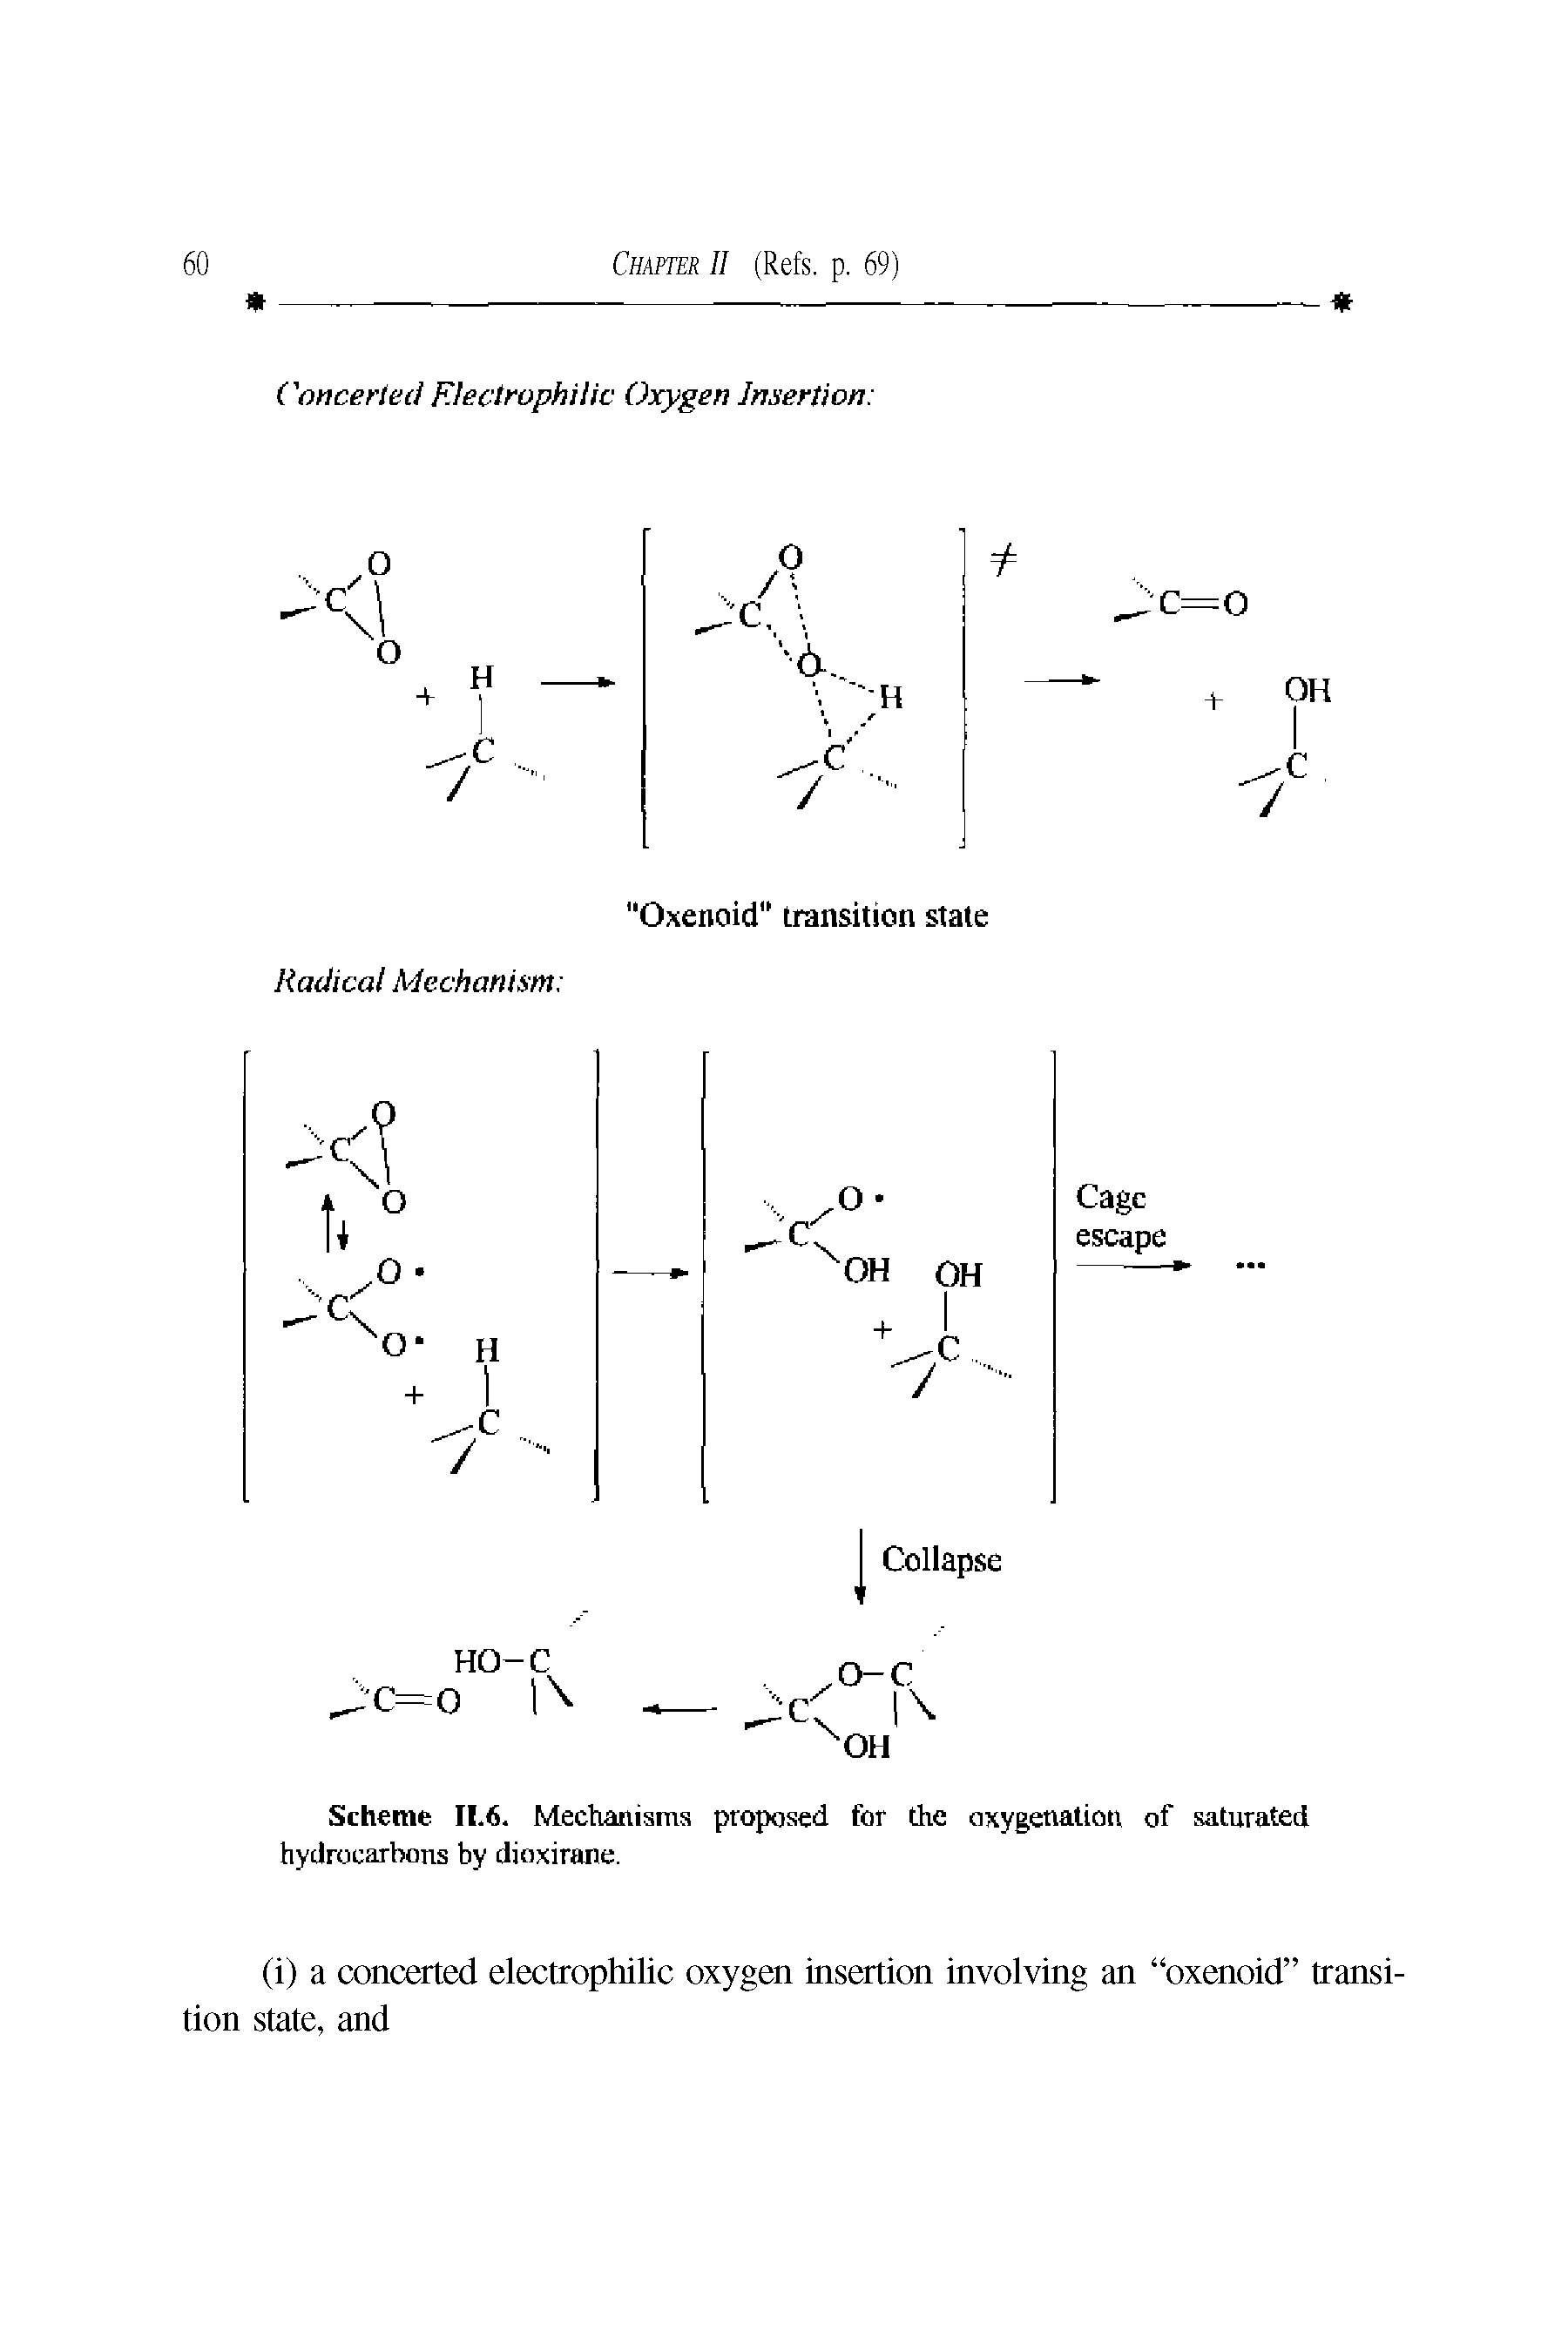 Scheme II.6. Mechanisms proposed for the oxygenation of saturated hydrocarbons by dioxirane.